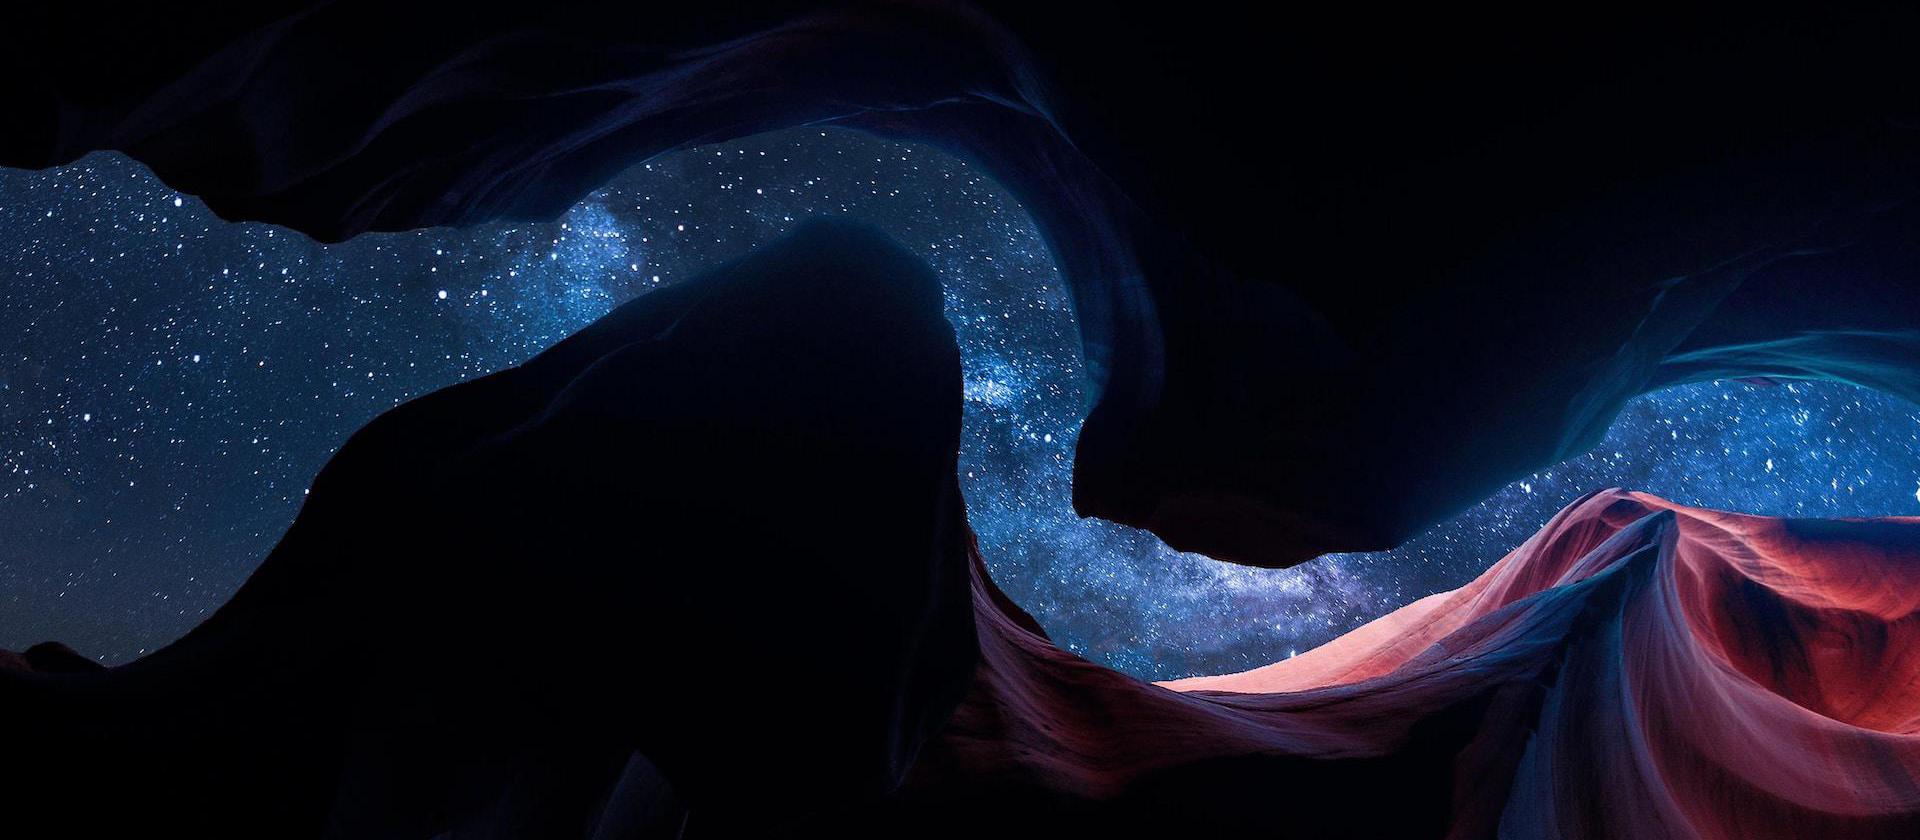 Image of looking up out of a slot canyon, seeing the stars above.